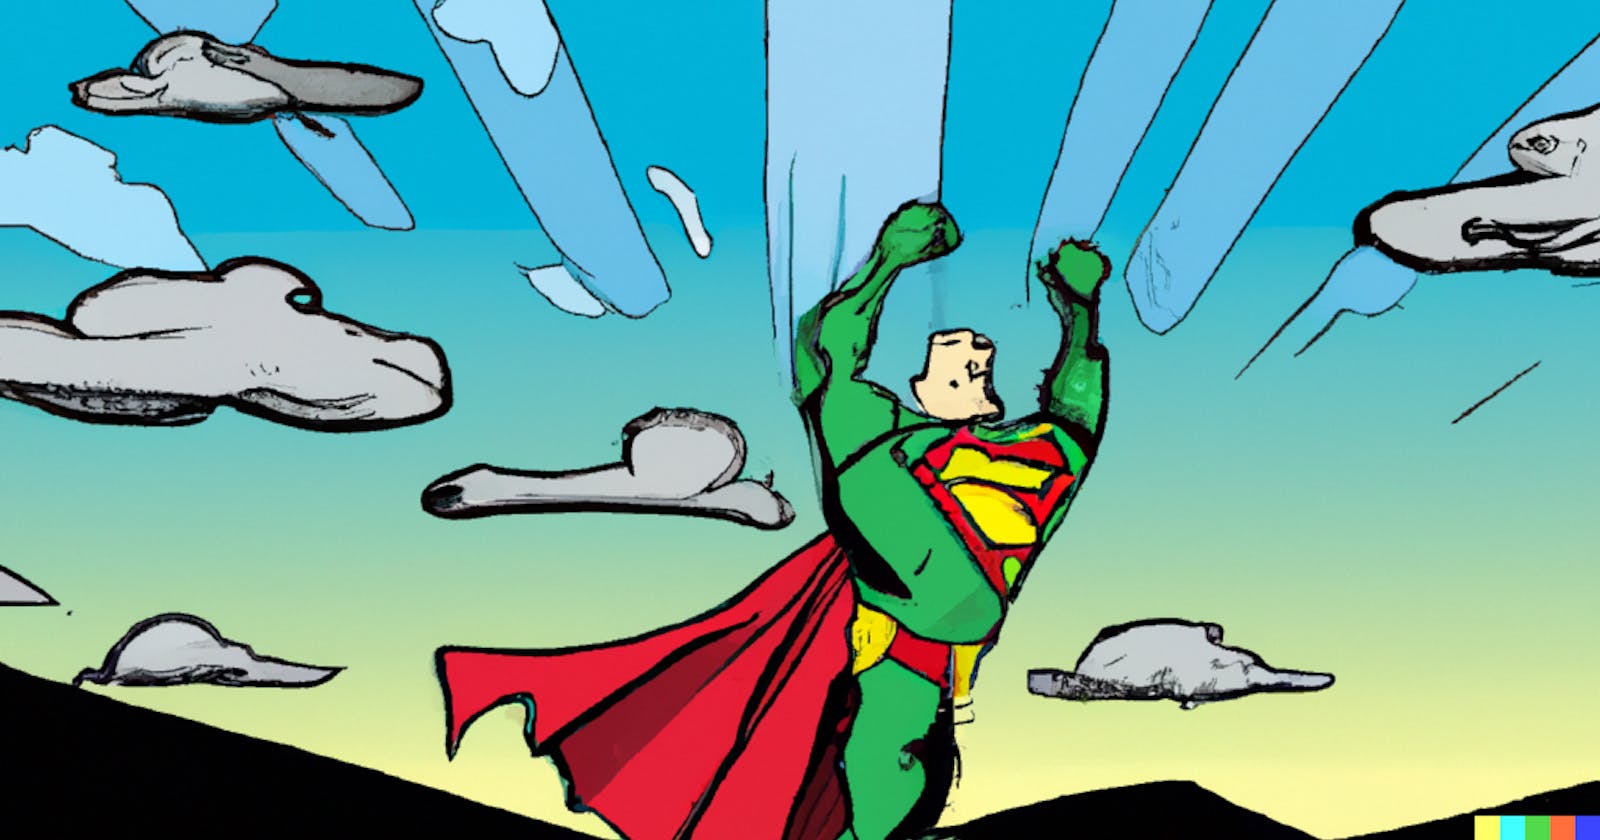 The Role of AI in Lex Luthor's Quest to Defeat Superman